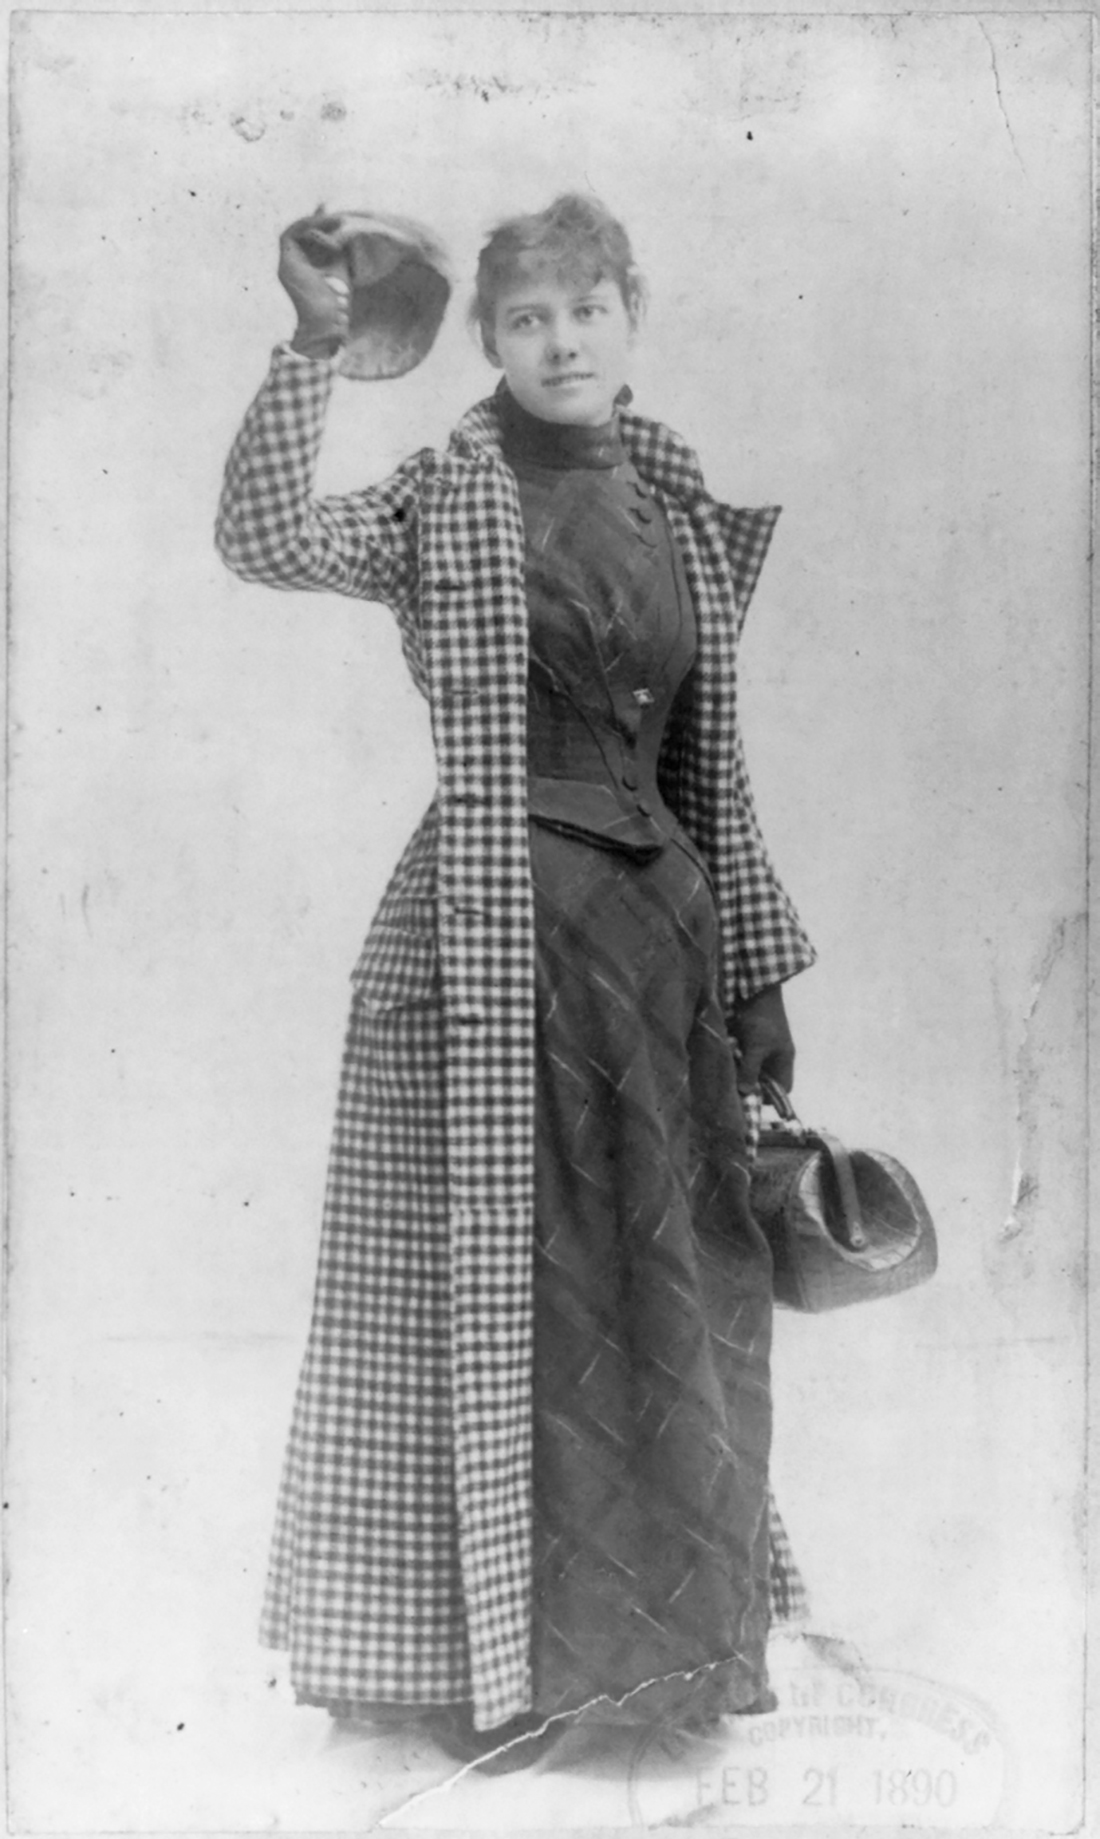 An image of Nellie Bly taken around 1890. She is standing holding a cap in her right hand and a bag in her left. She is wearing a long, dark, dress and a checkered coat. Her hair is pulled back. 